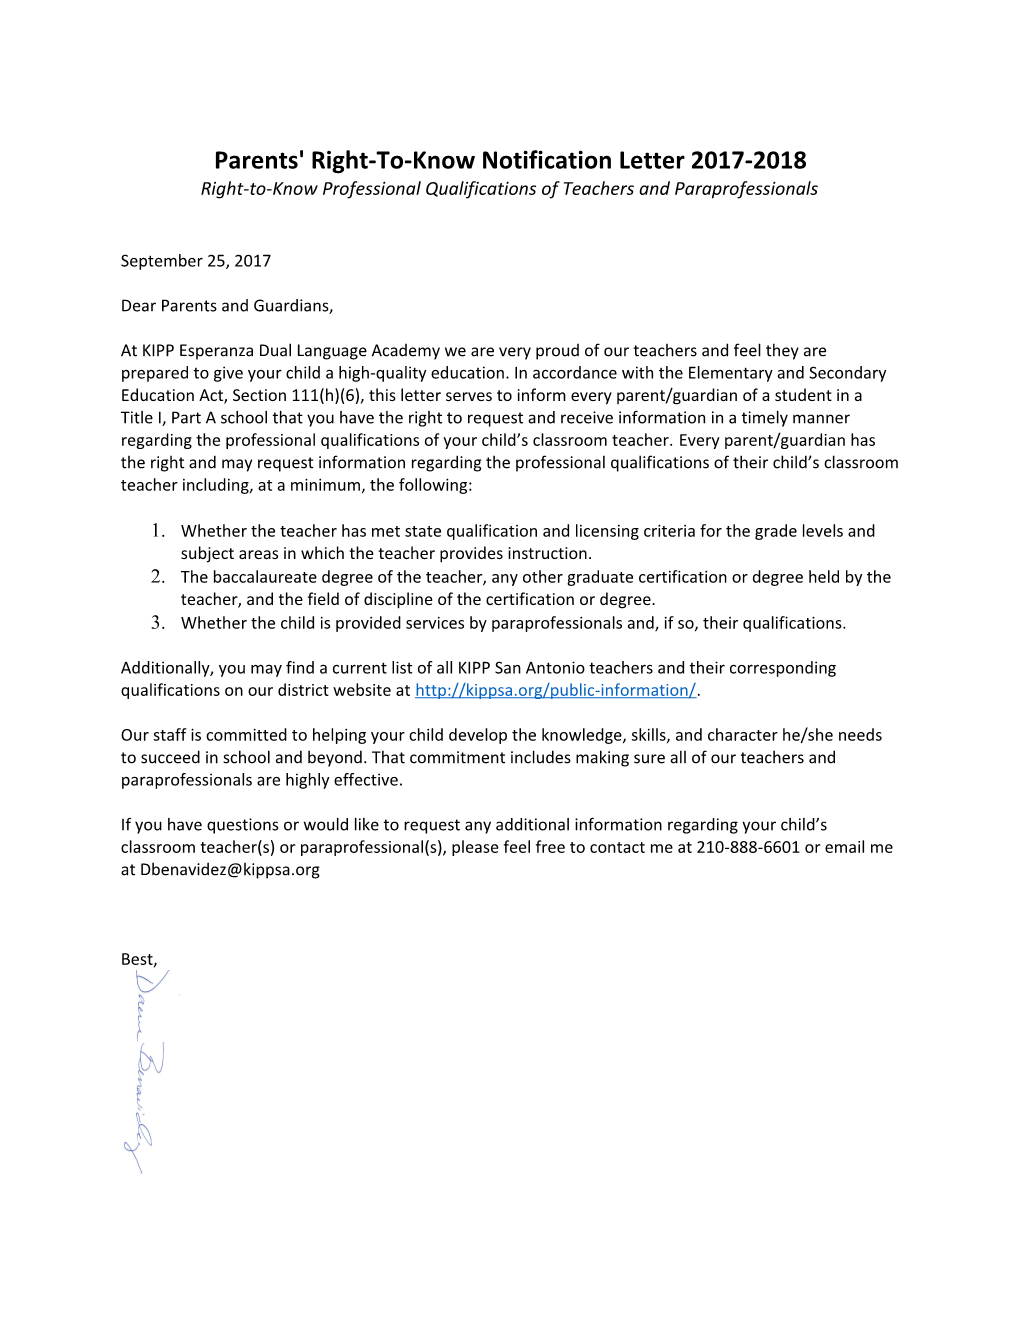 Parents' Right-To-Know Notification Letter 2017-2018